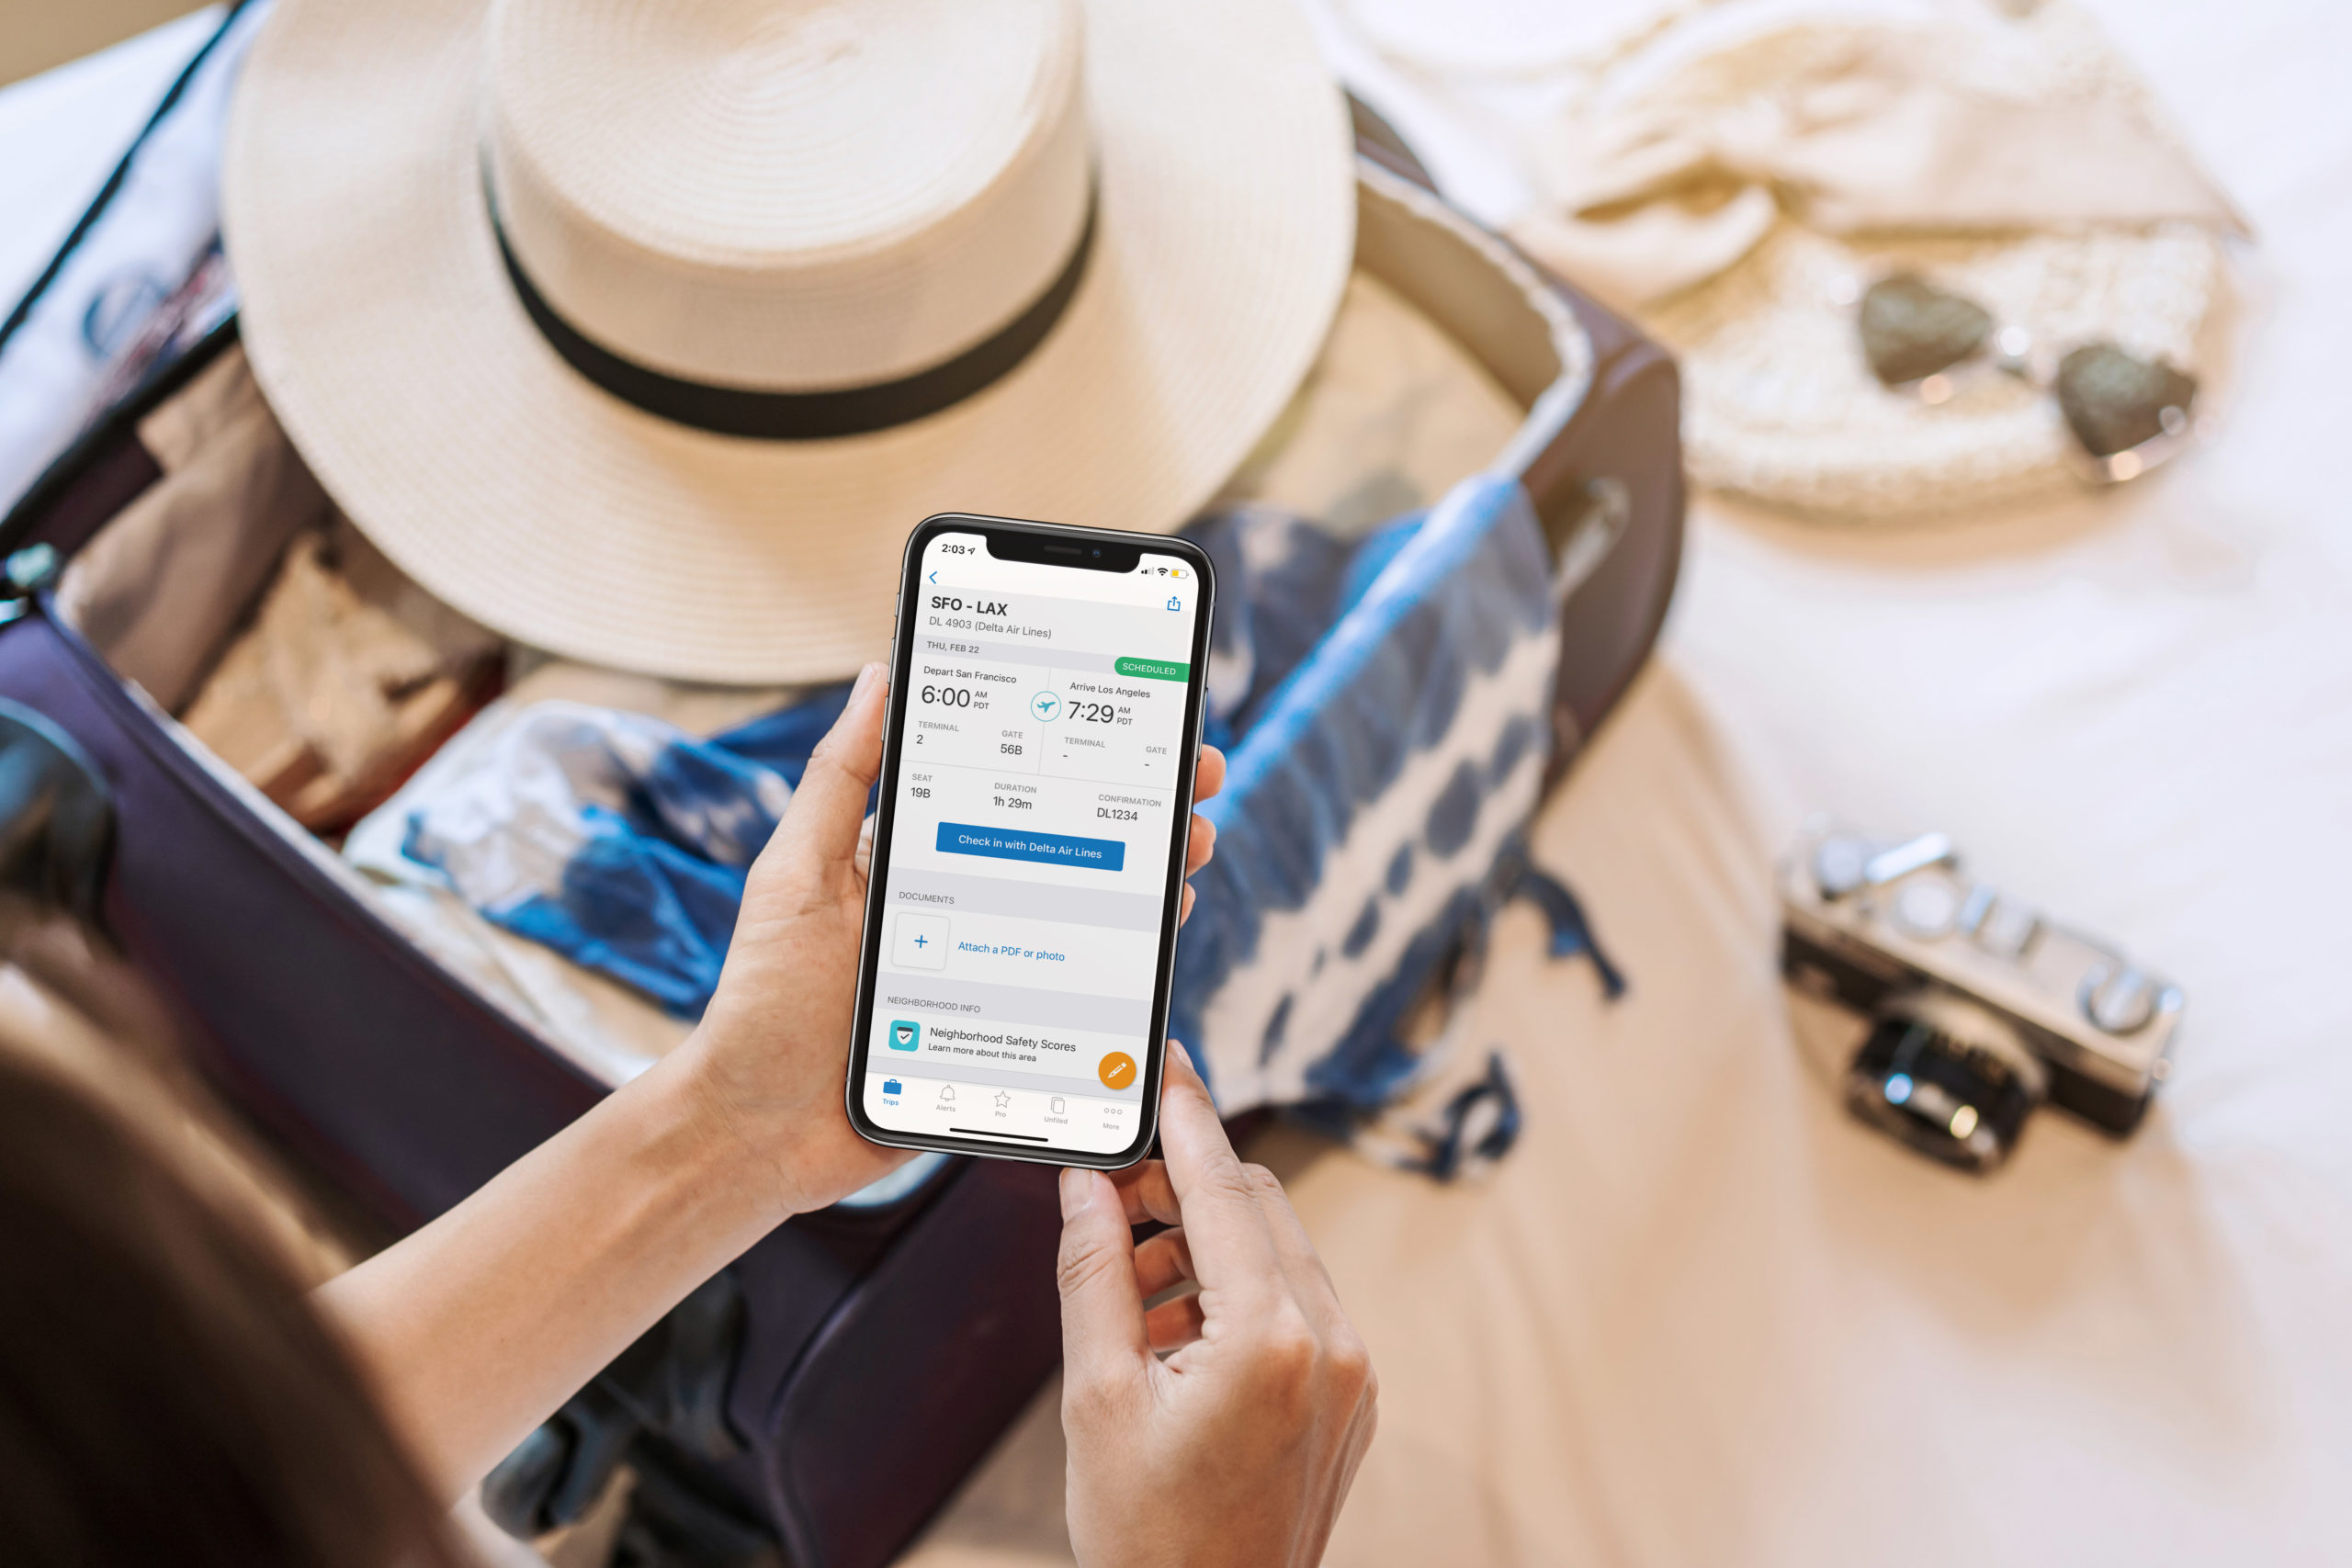 New TripIt Features Make It Even More an AllInOne Solution for Travel